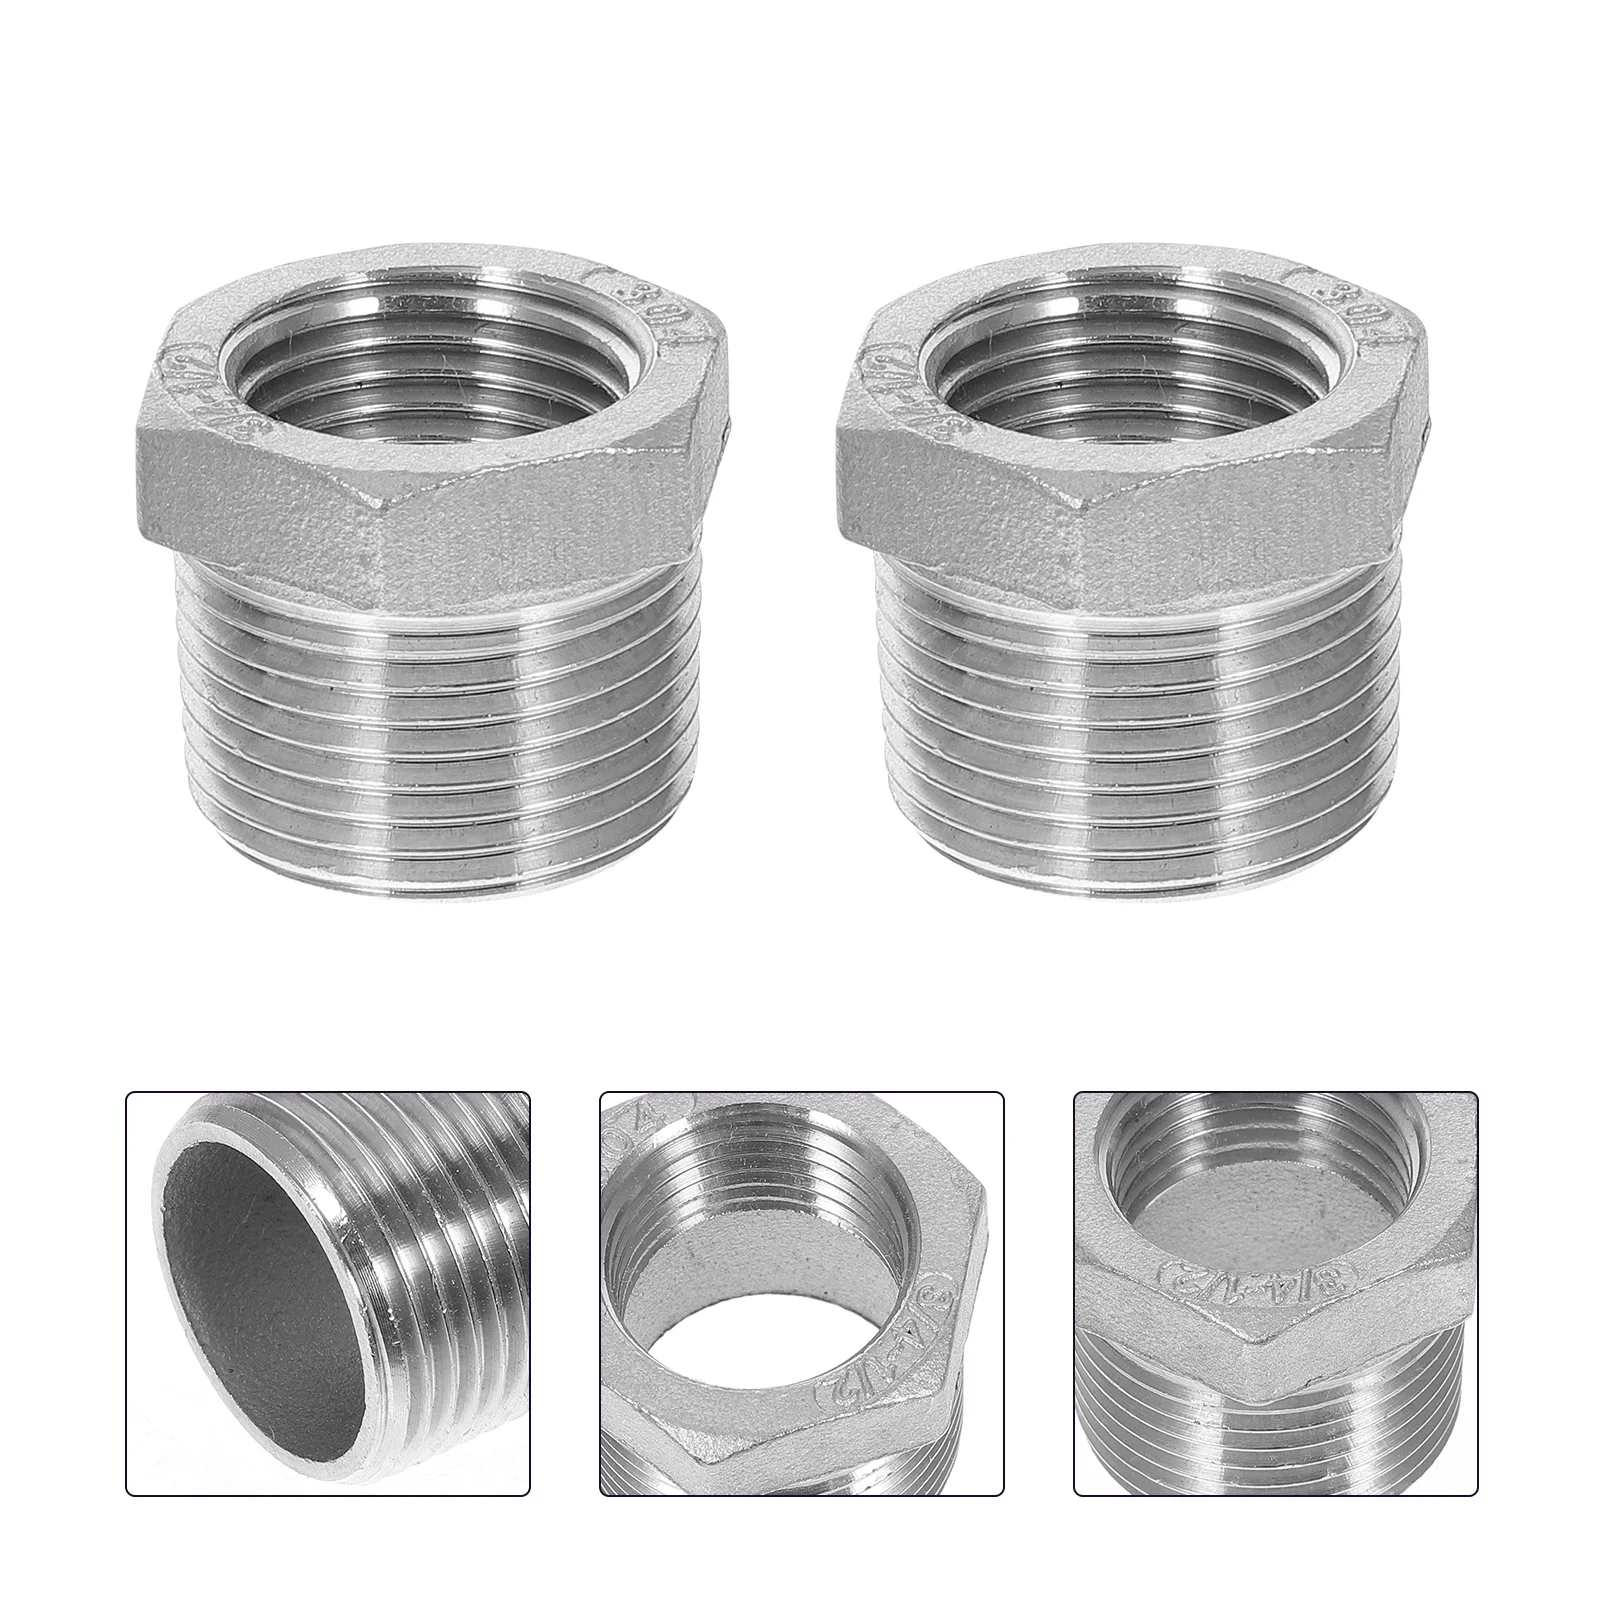 

4 2 Hose Reducer Adapter Fittings Garden Bushing Fitting Npt Connectors Hex Connector Male Female Coupling Quick Connect